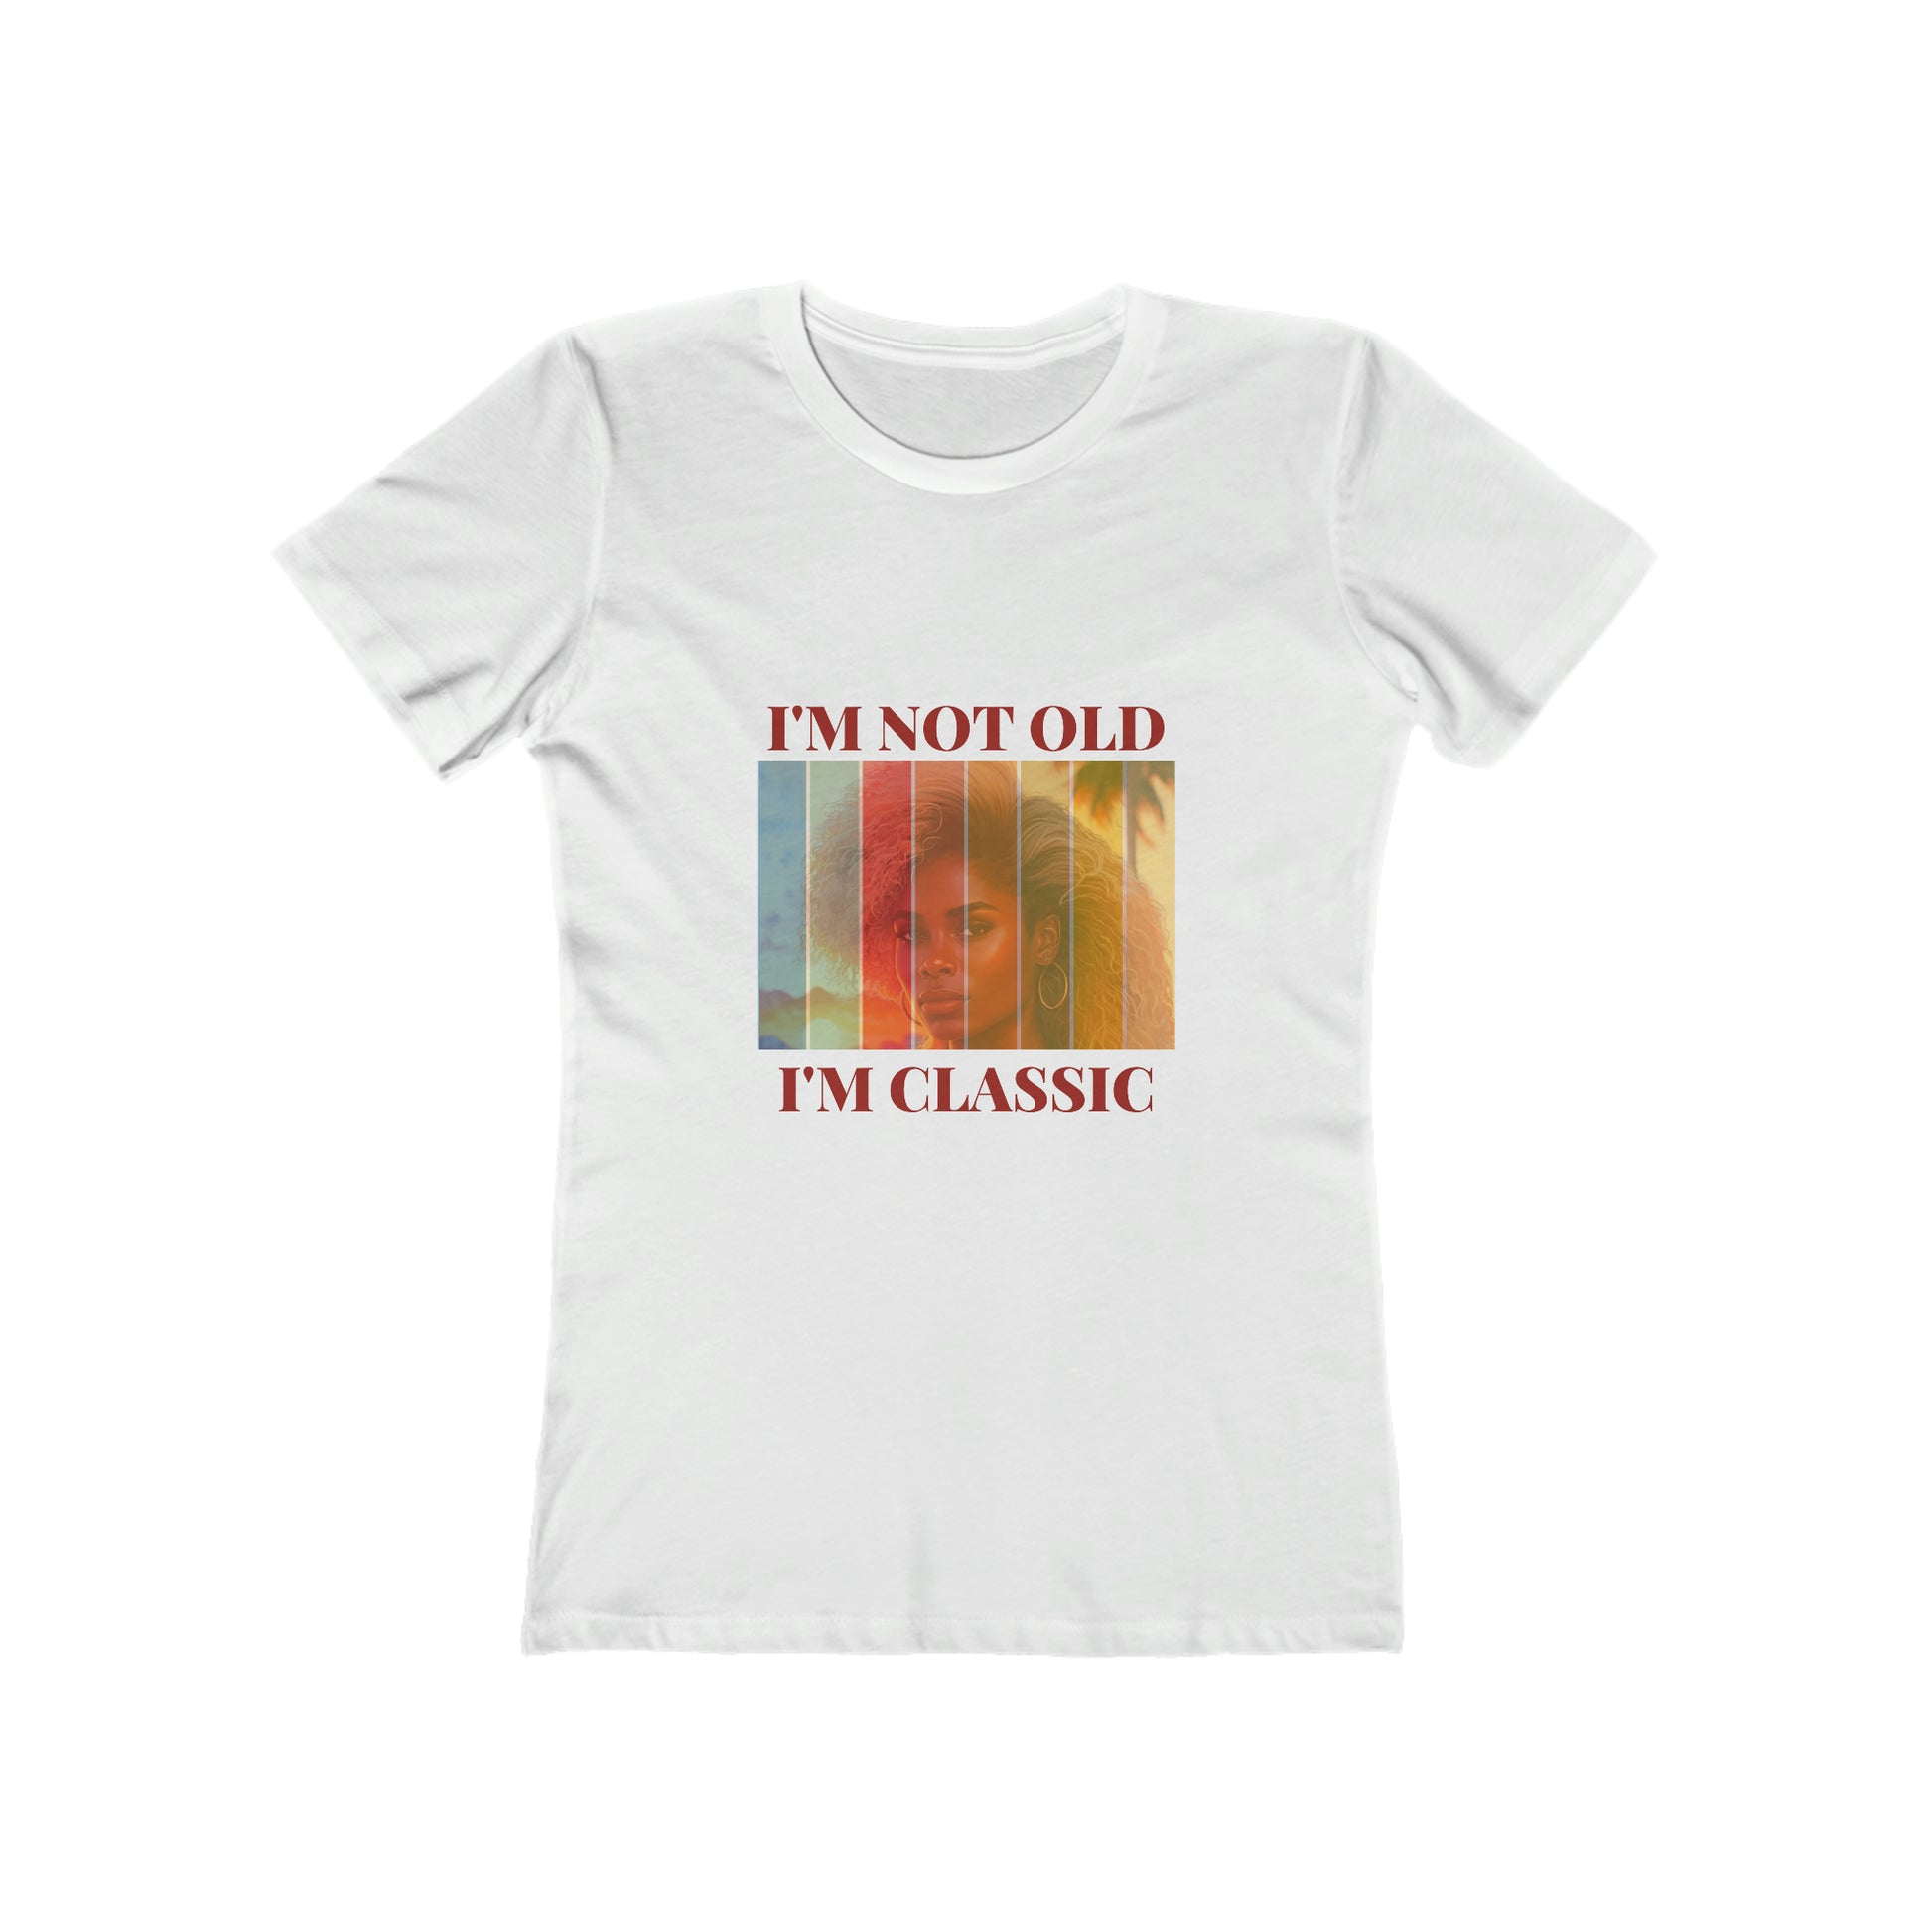 I’M NOT OLD T-SHIRT